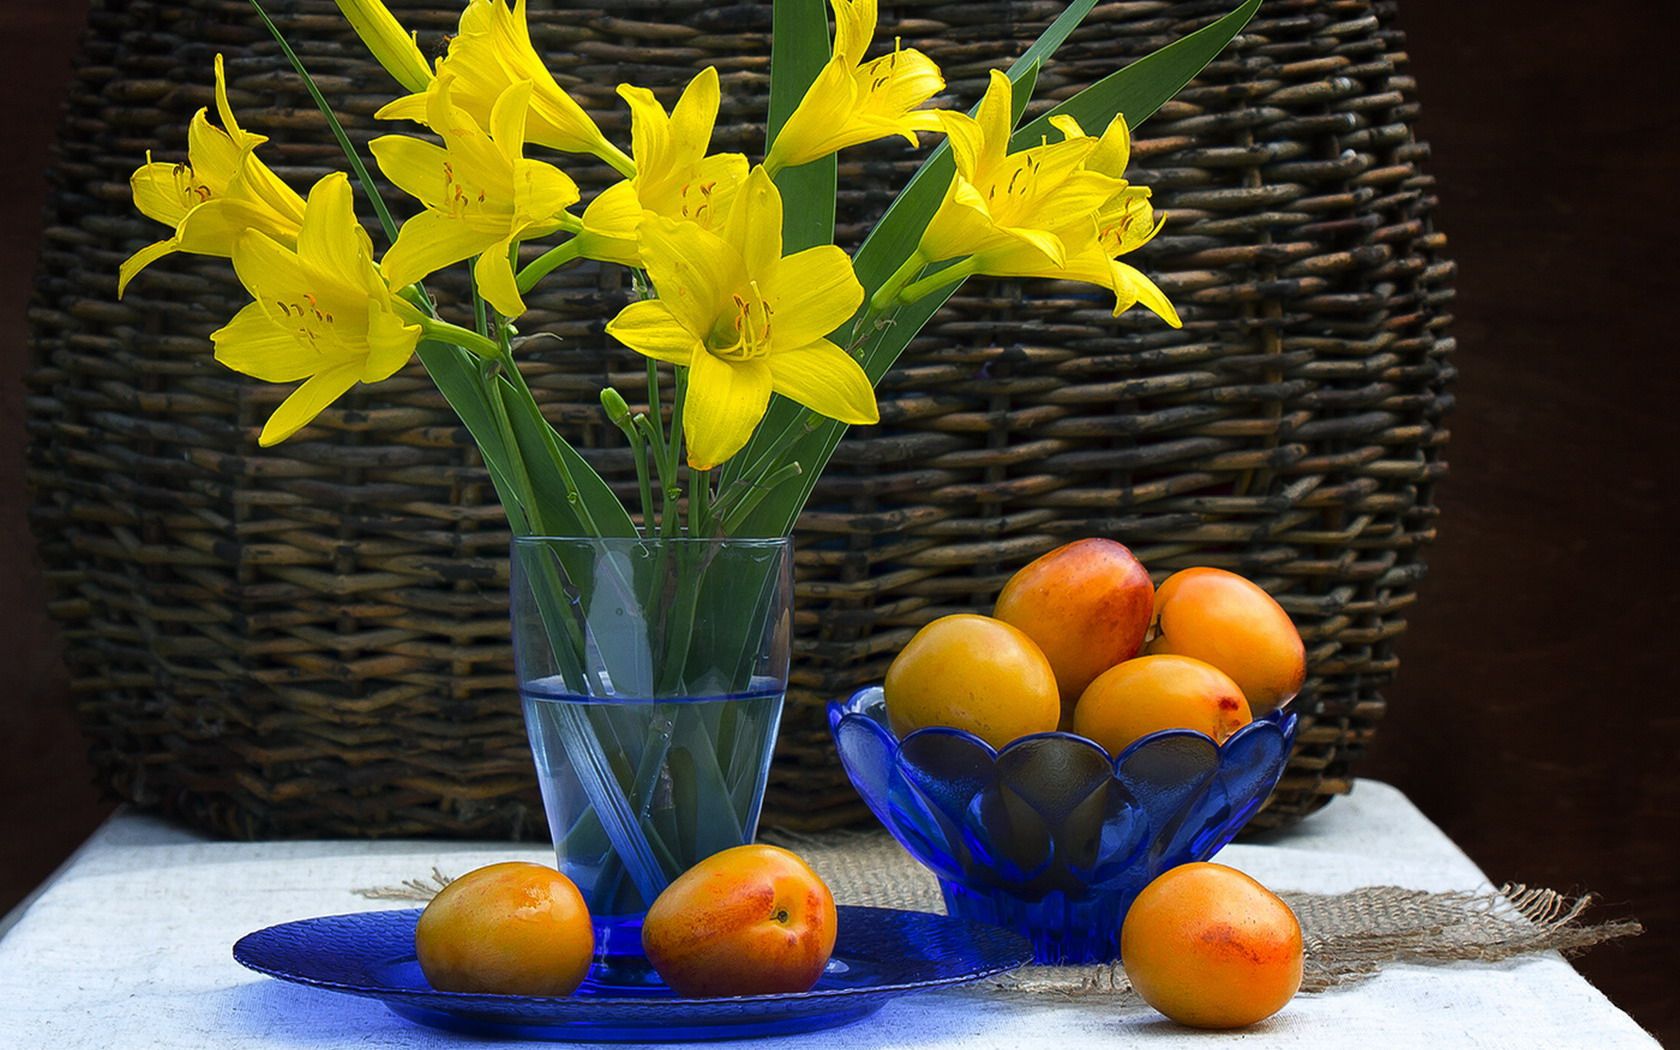 photography, still life, flower, fruit, lily, wicker, yellow flower